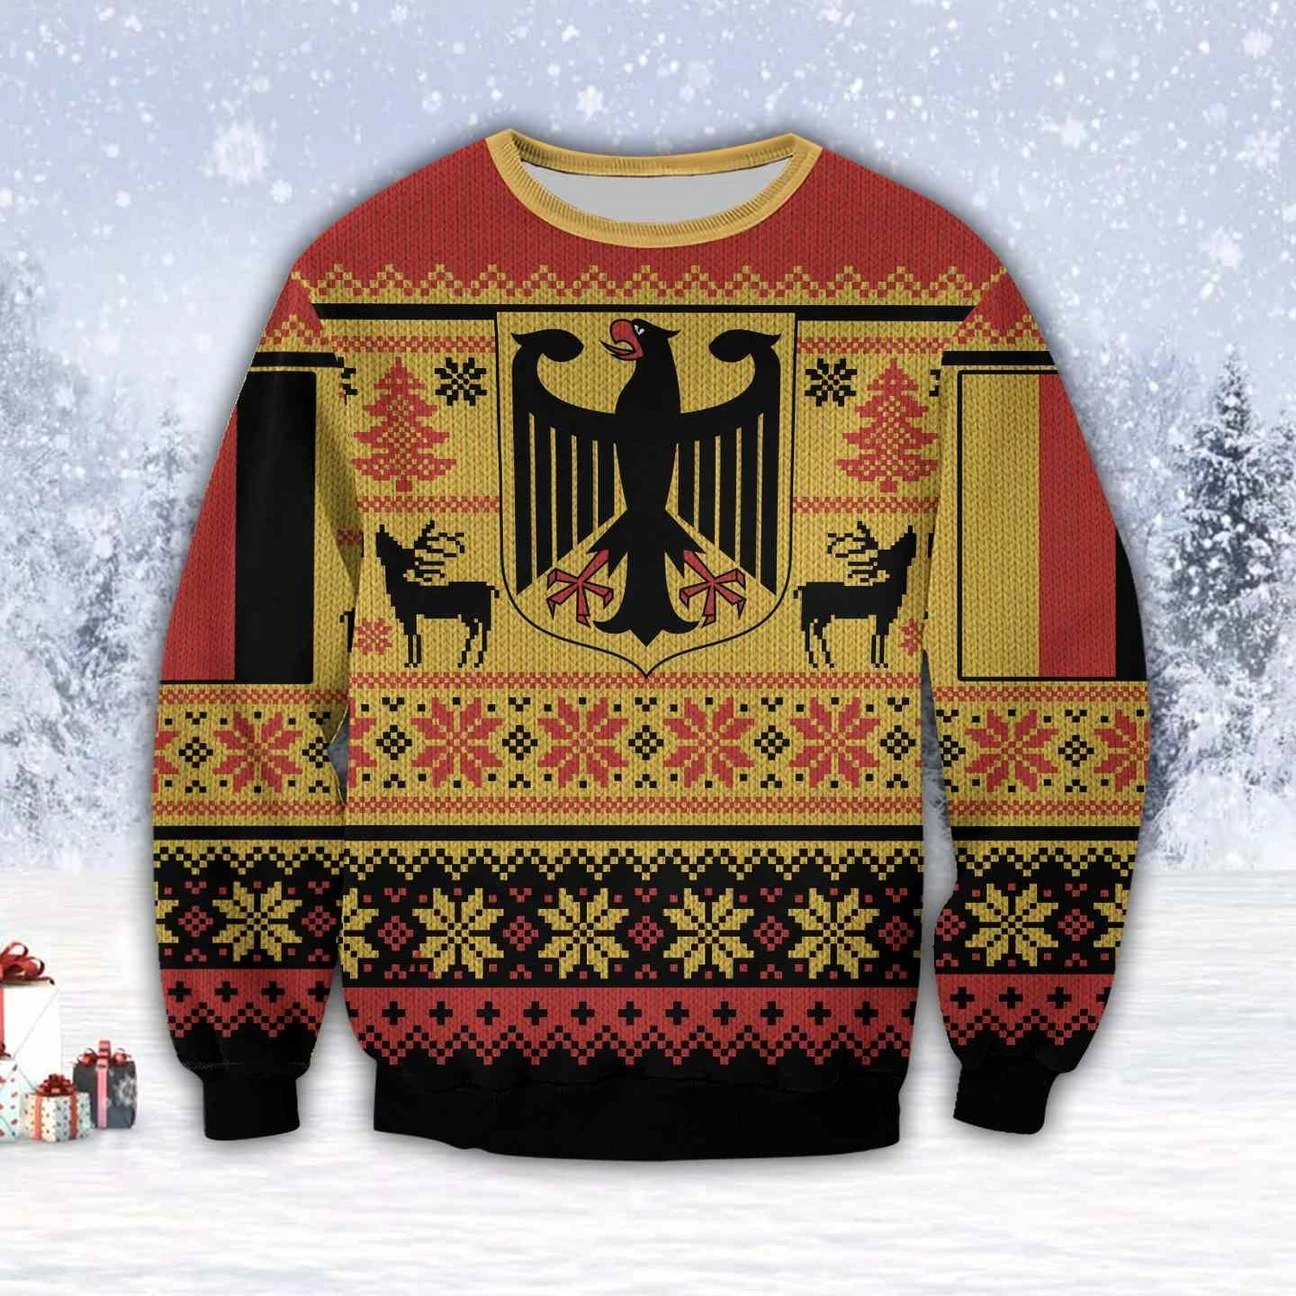 GERMANY 3D ALL OVER PRINT UGLY CHRISTMAS SWEATER